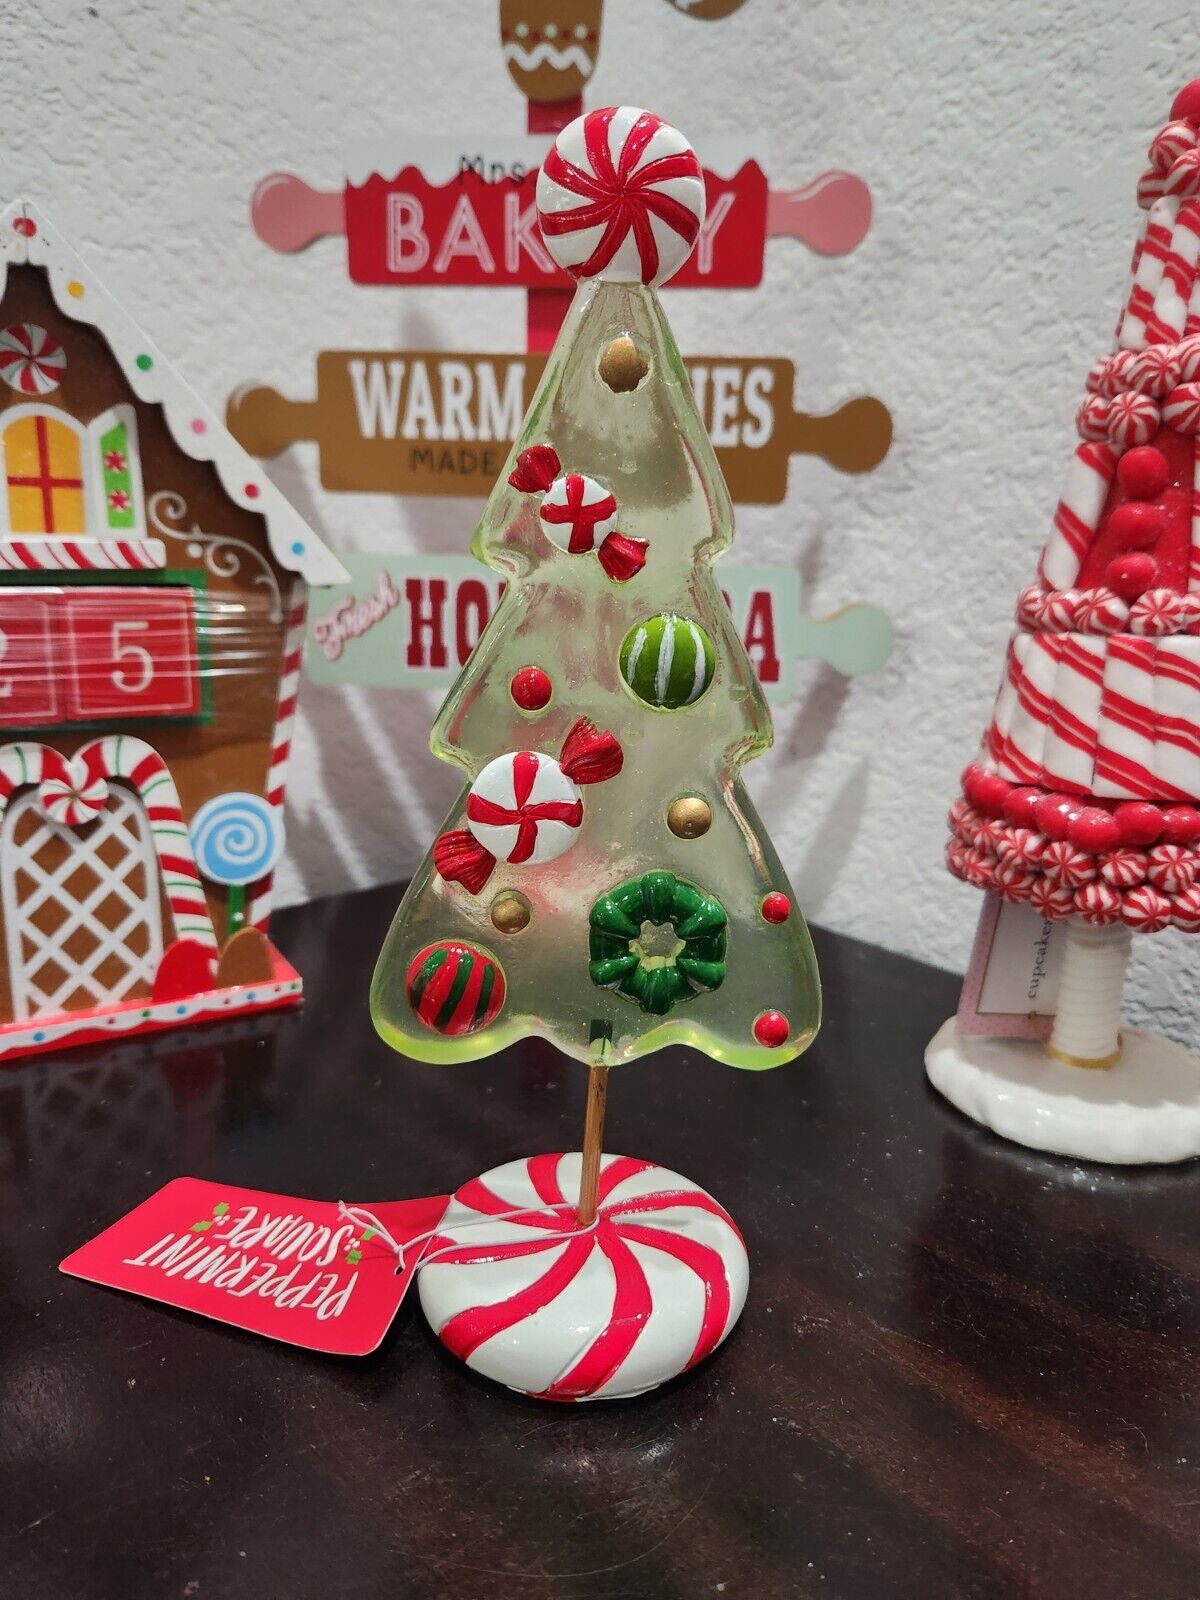 CHRISTMAS Gingerbread Peppermint Square Candy Tree Figurine Tabletop Decor 9.75